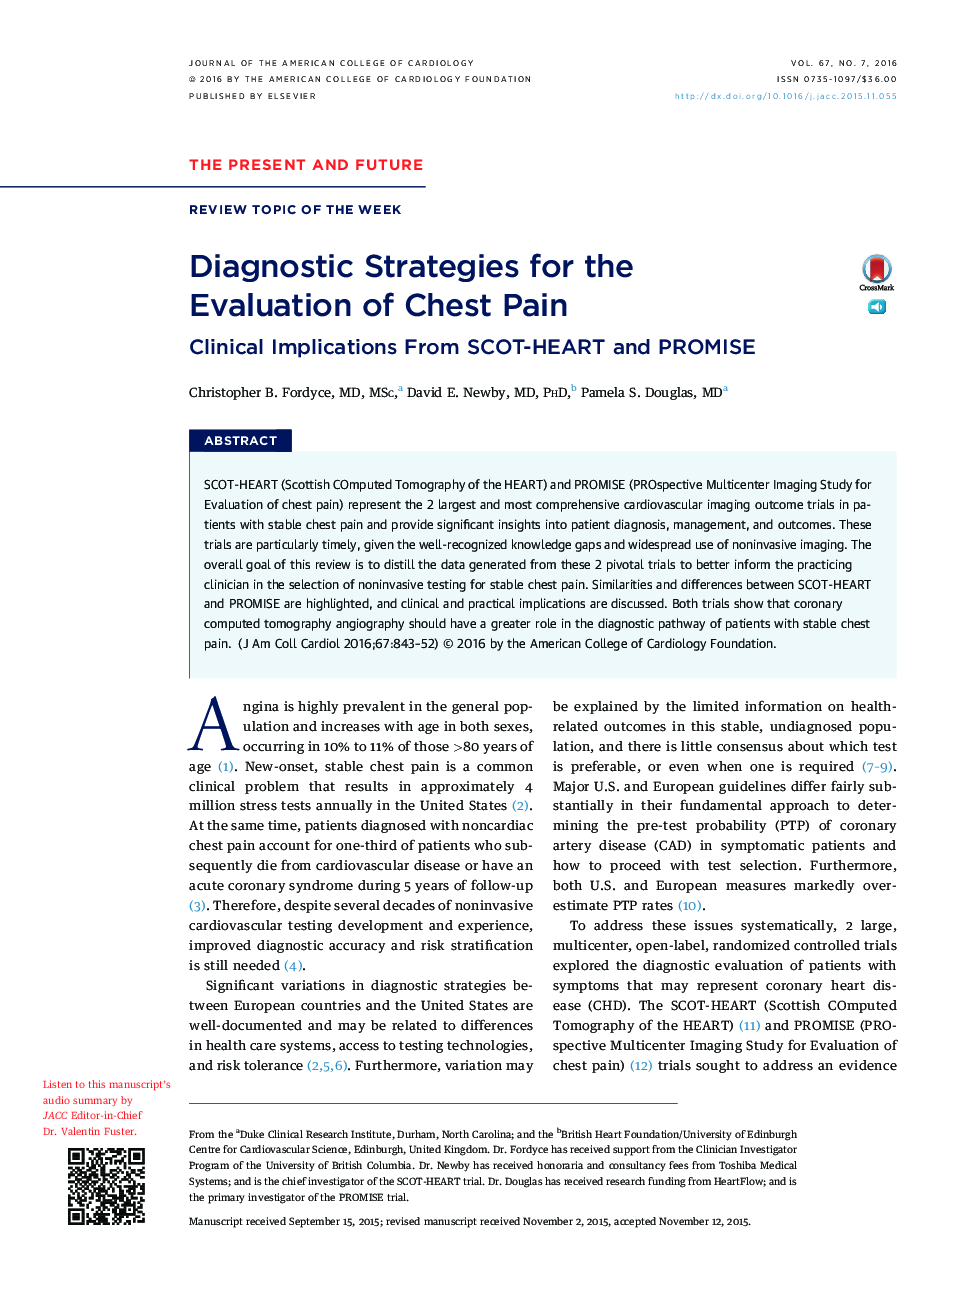 Diagnostic Strategies for the EvaluationÂ ofÂ Chest Pain: Clinical Implications From SCOT-HEART and PROMISE